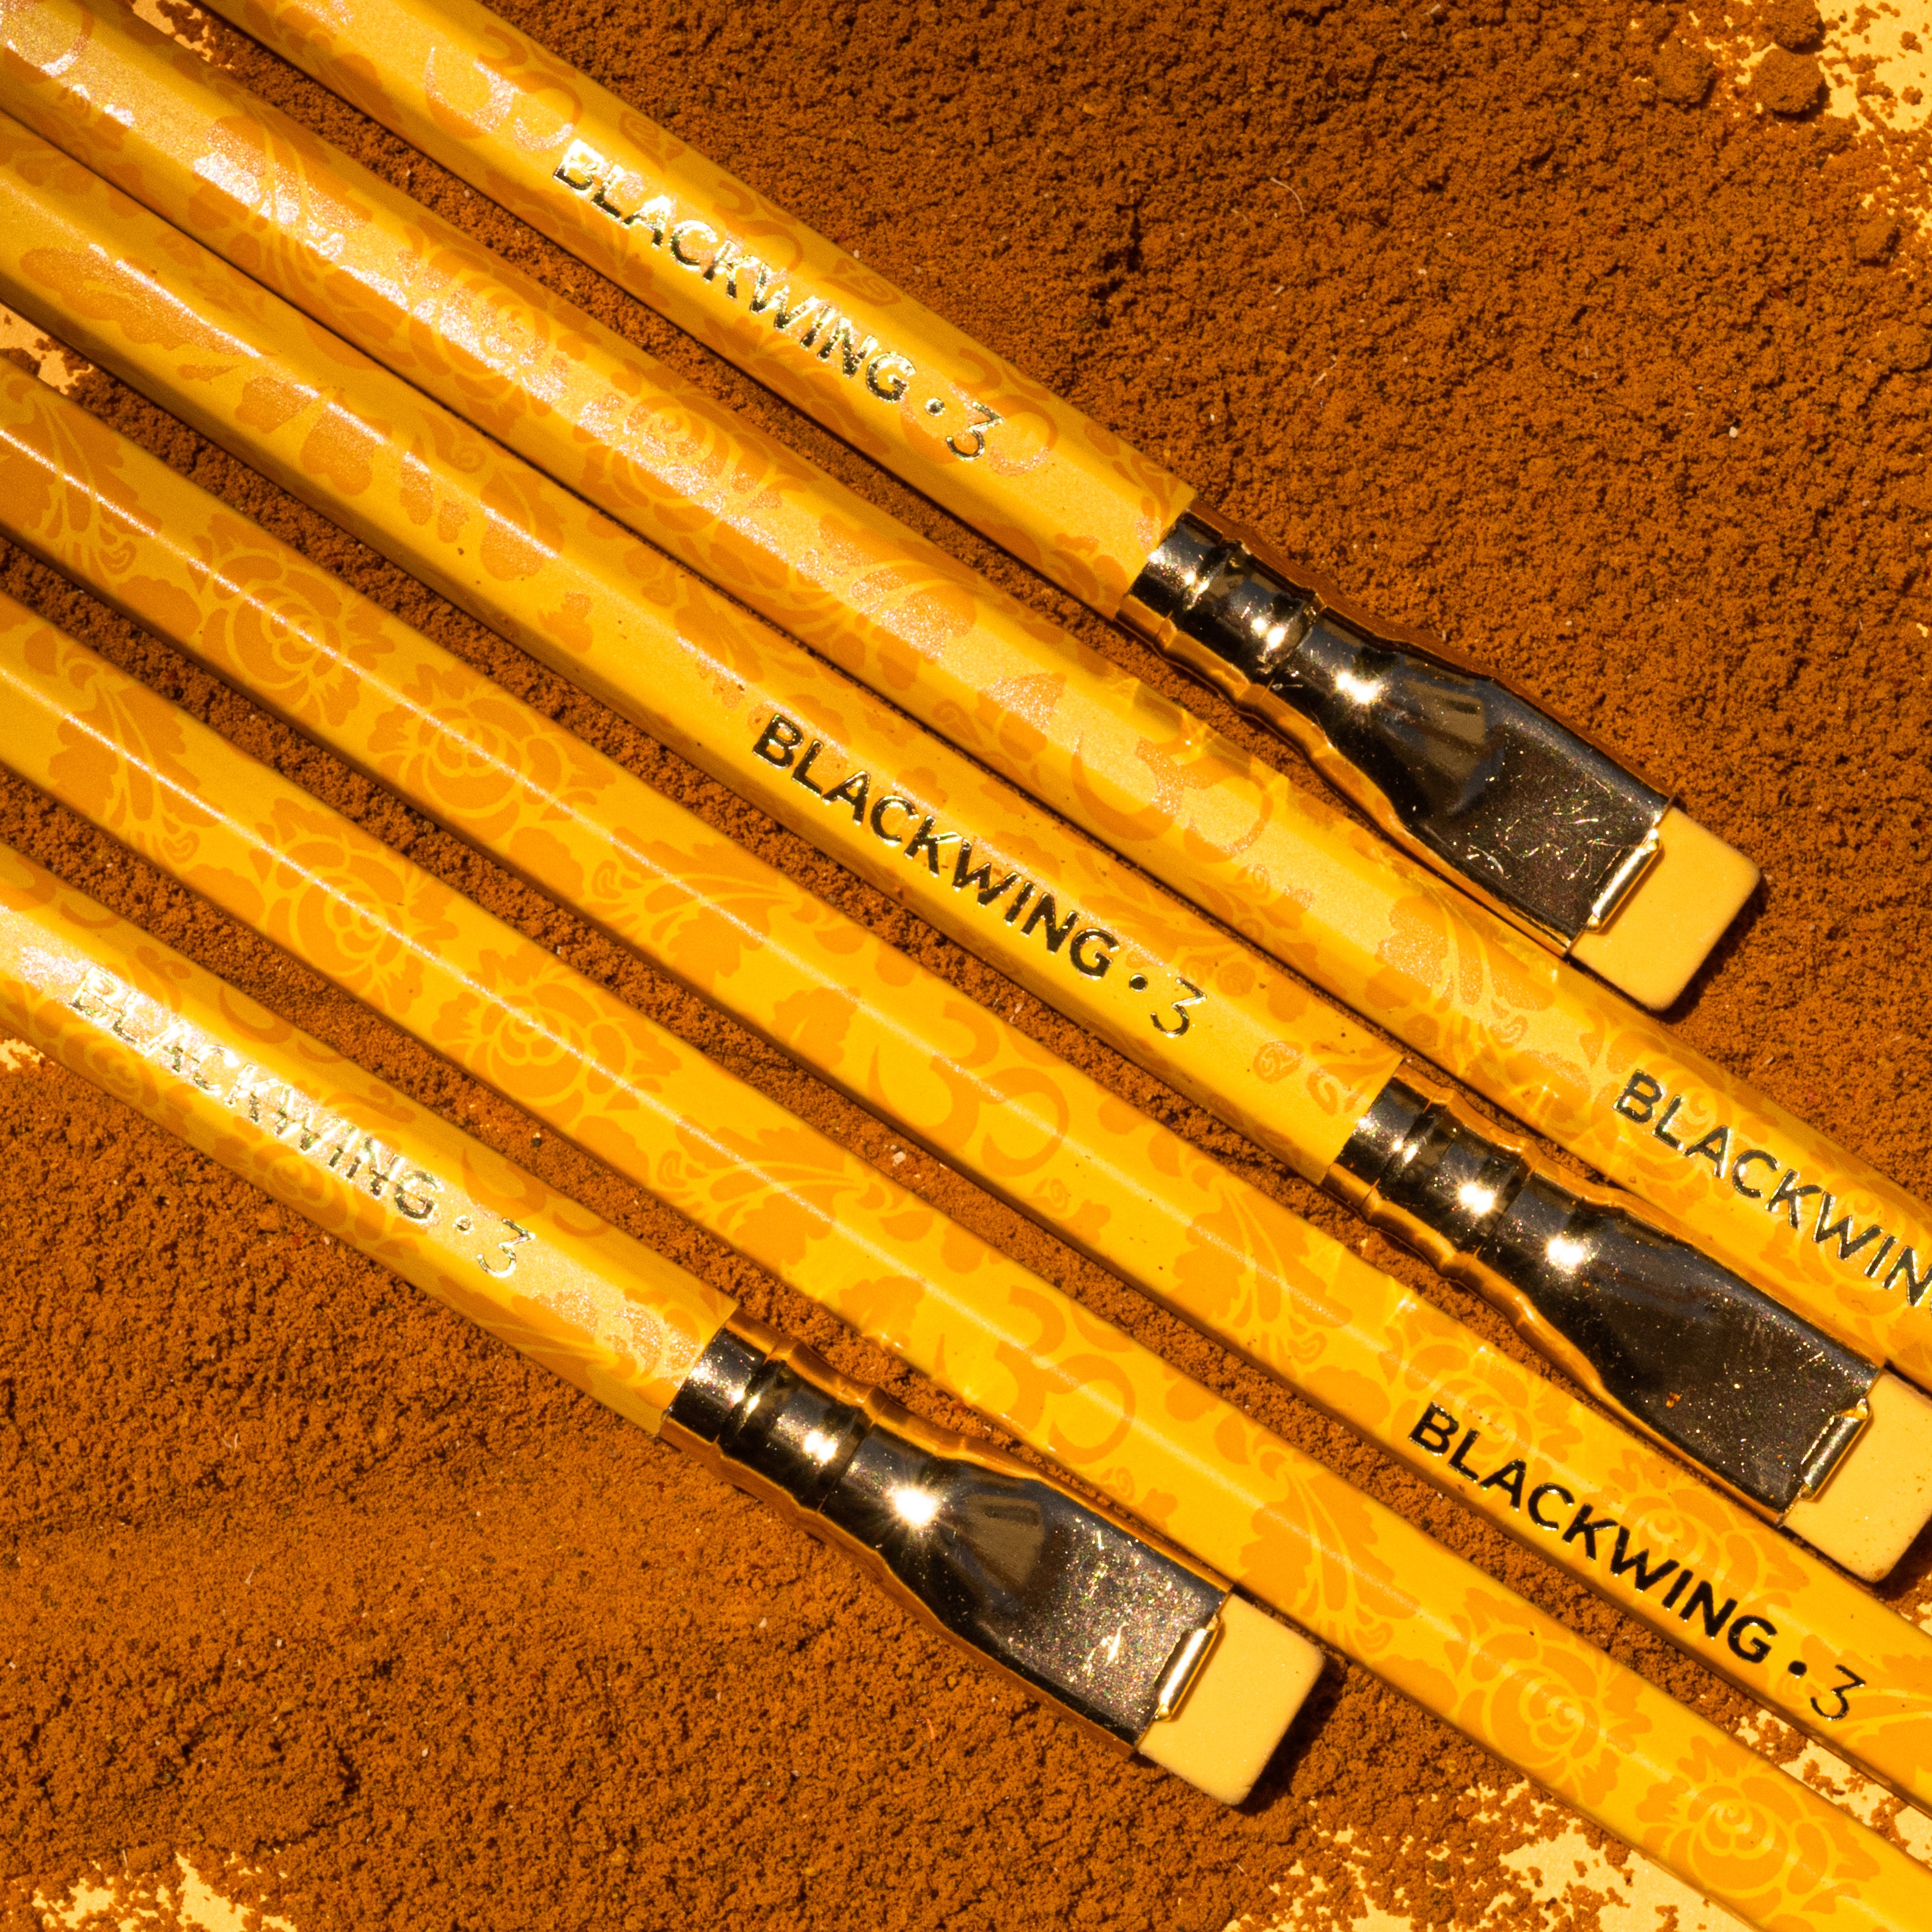 A group of Blackwing Volume 3 (Set of 12) pencils lay on top of a pile of sand.